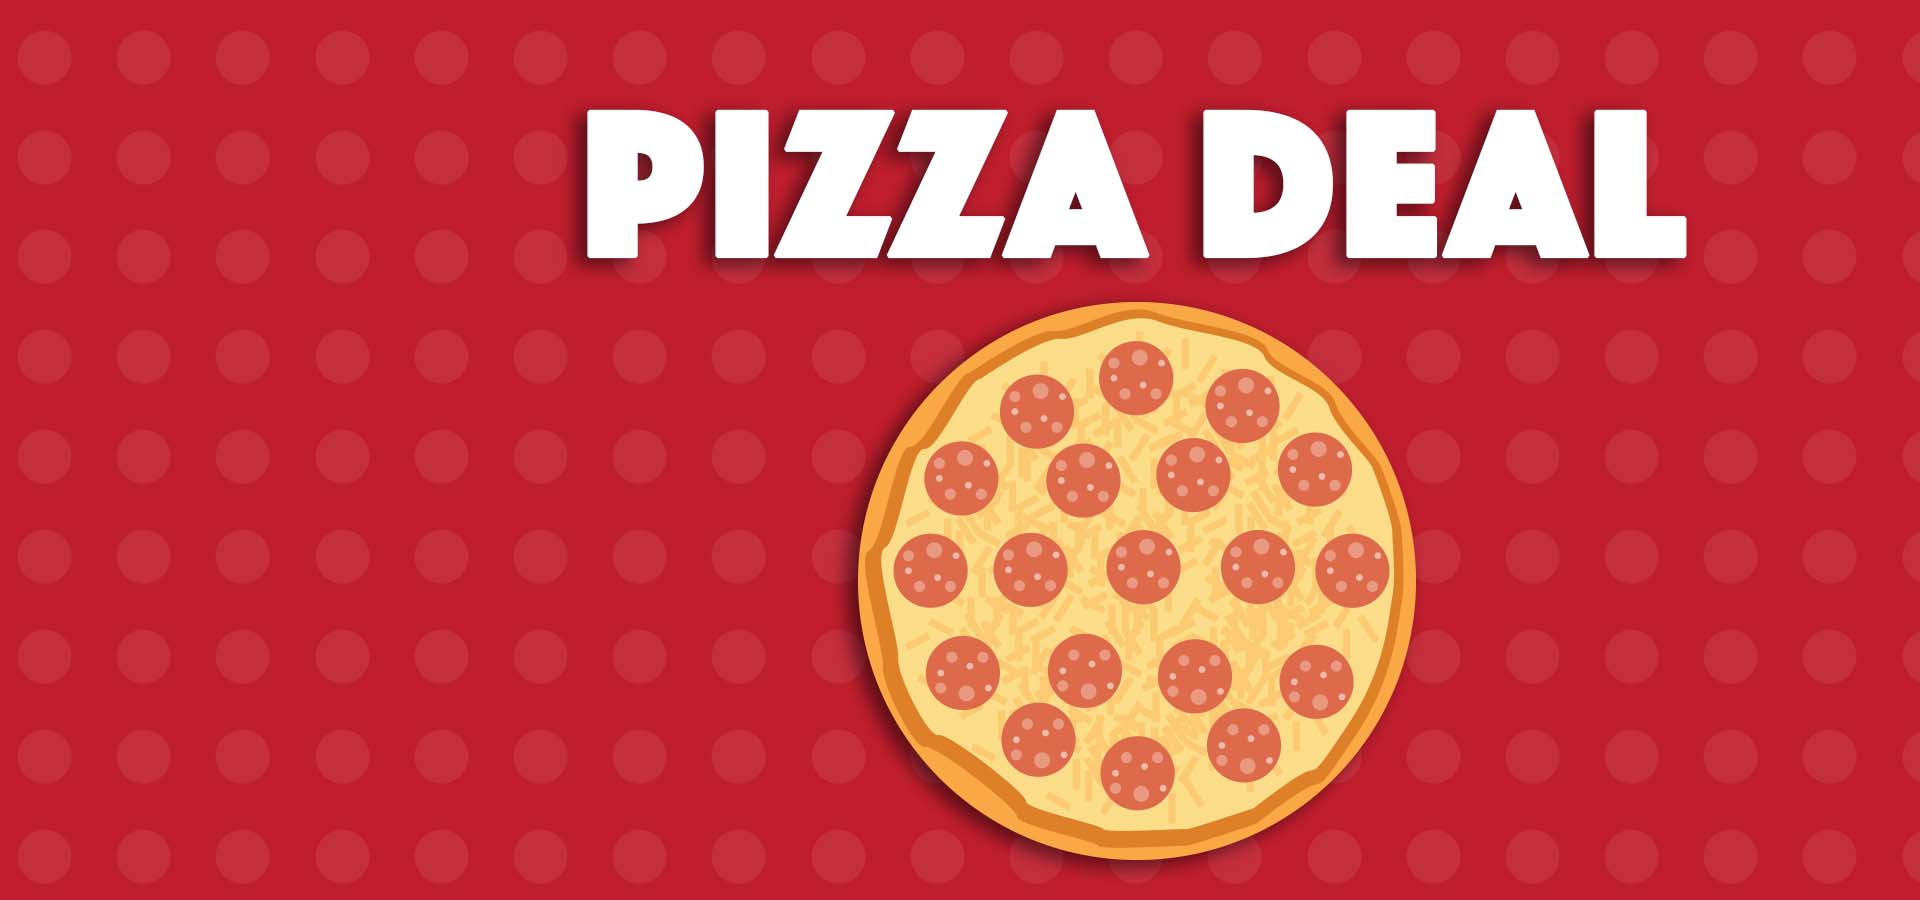 $2 OFF Any large pizza